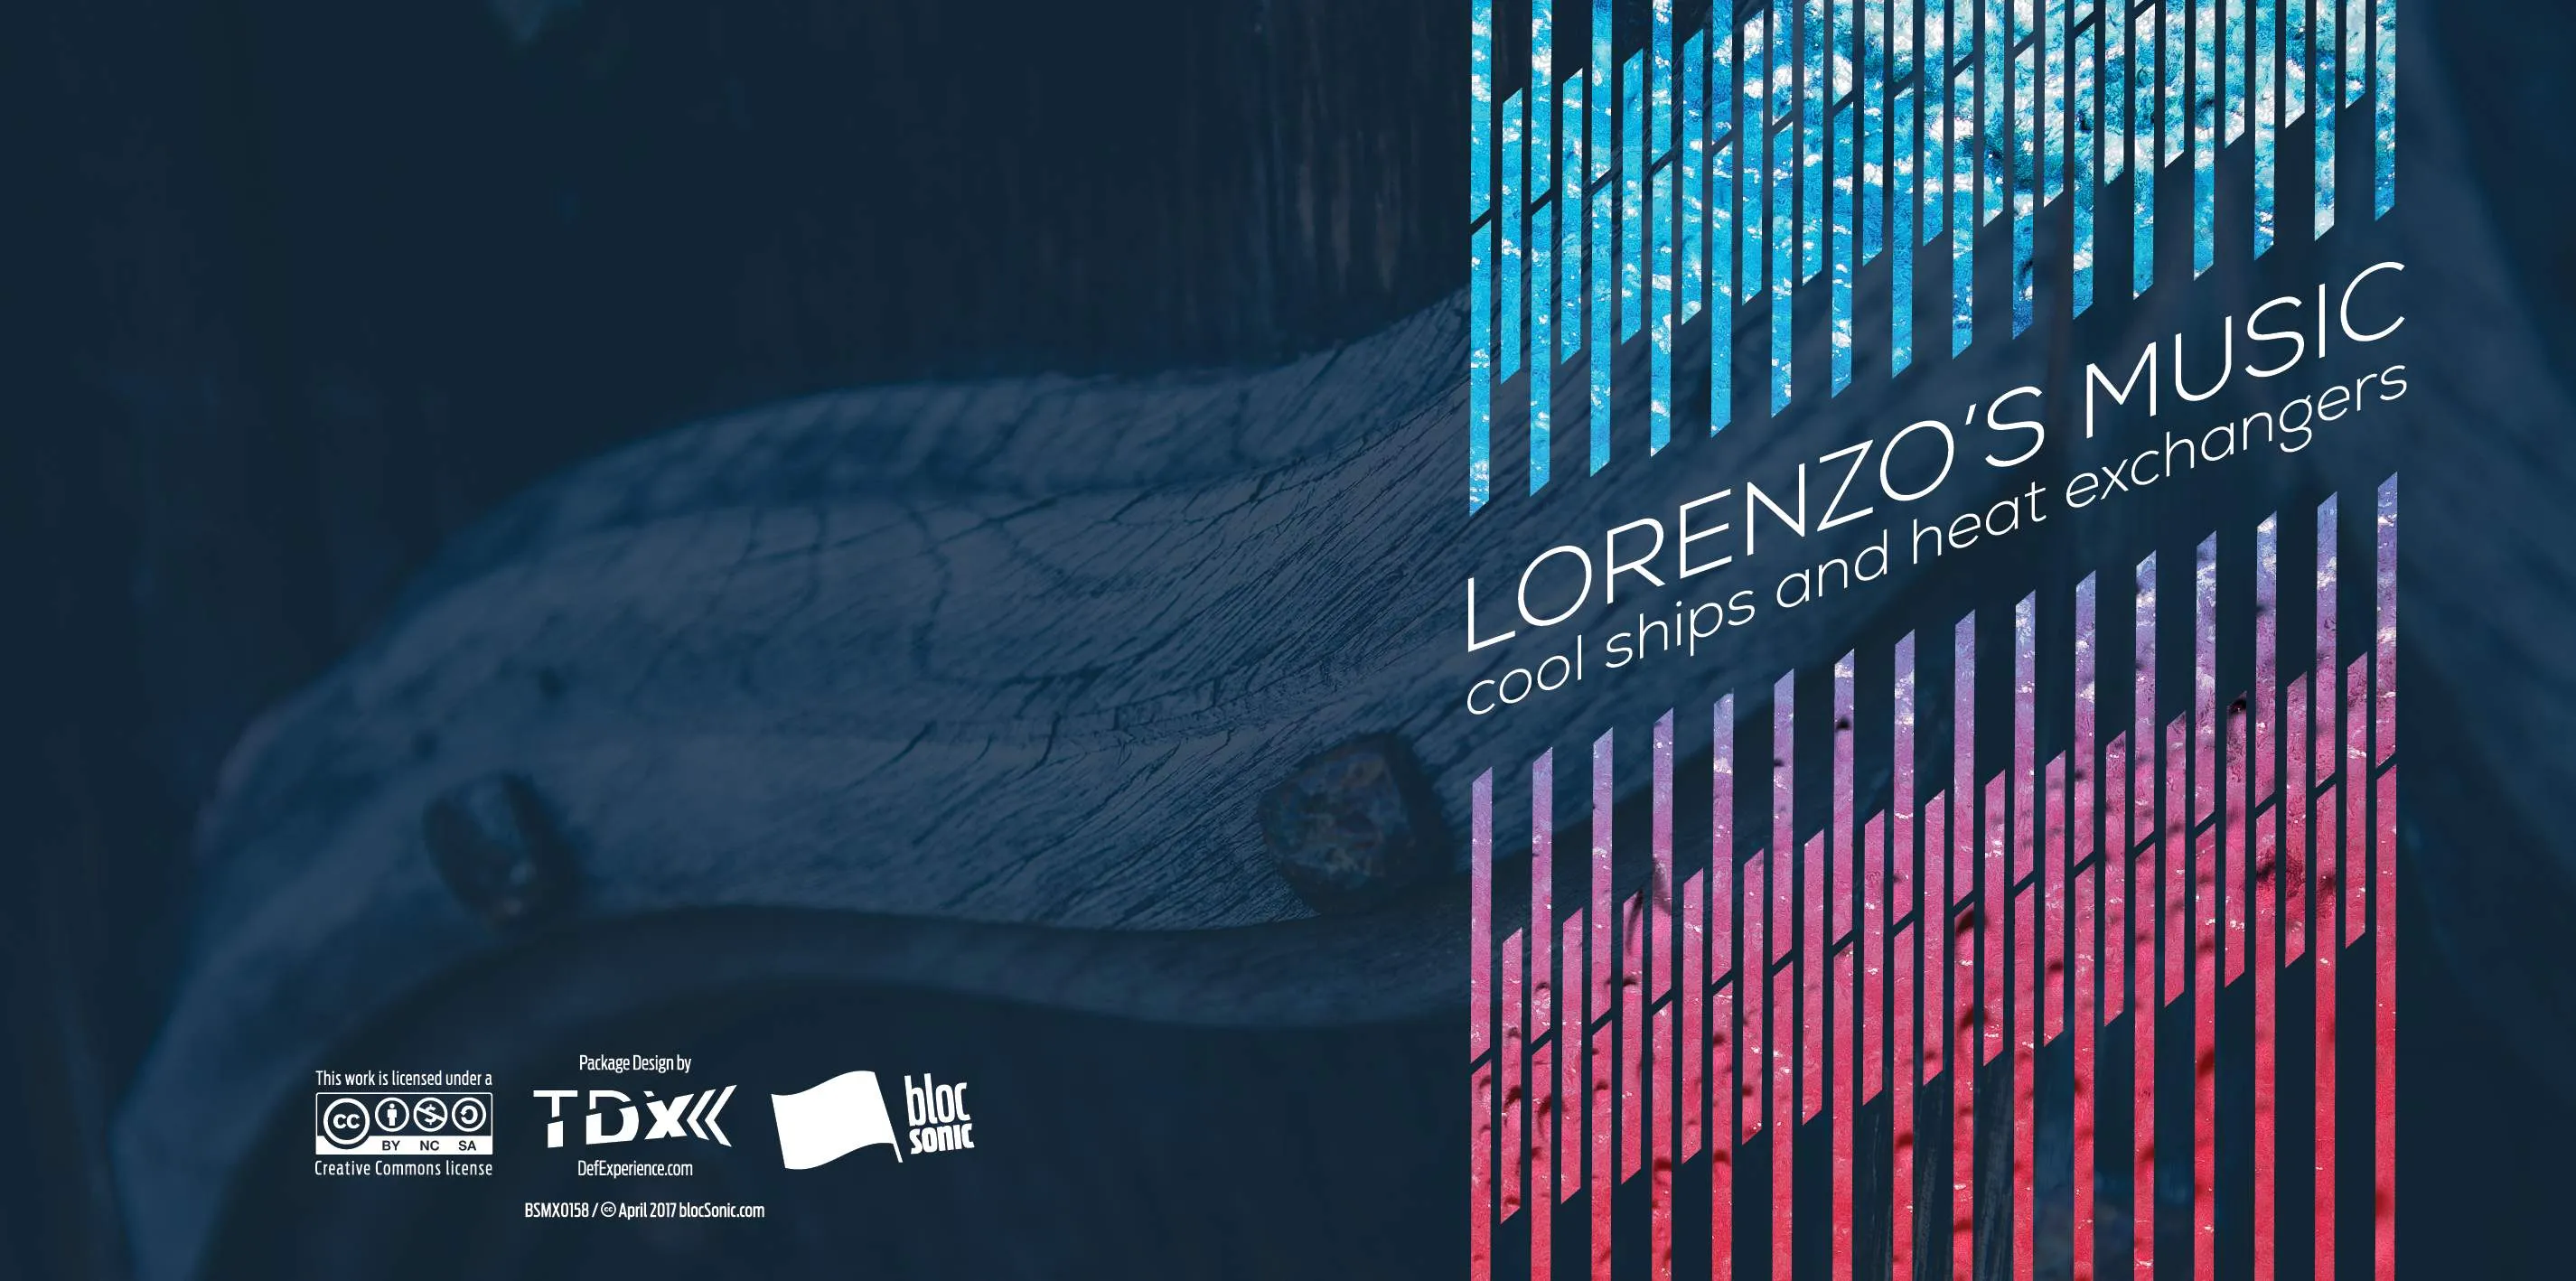 Album insert for “Cool ships and heat exchangers” by Lorenzo's Music